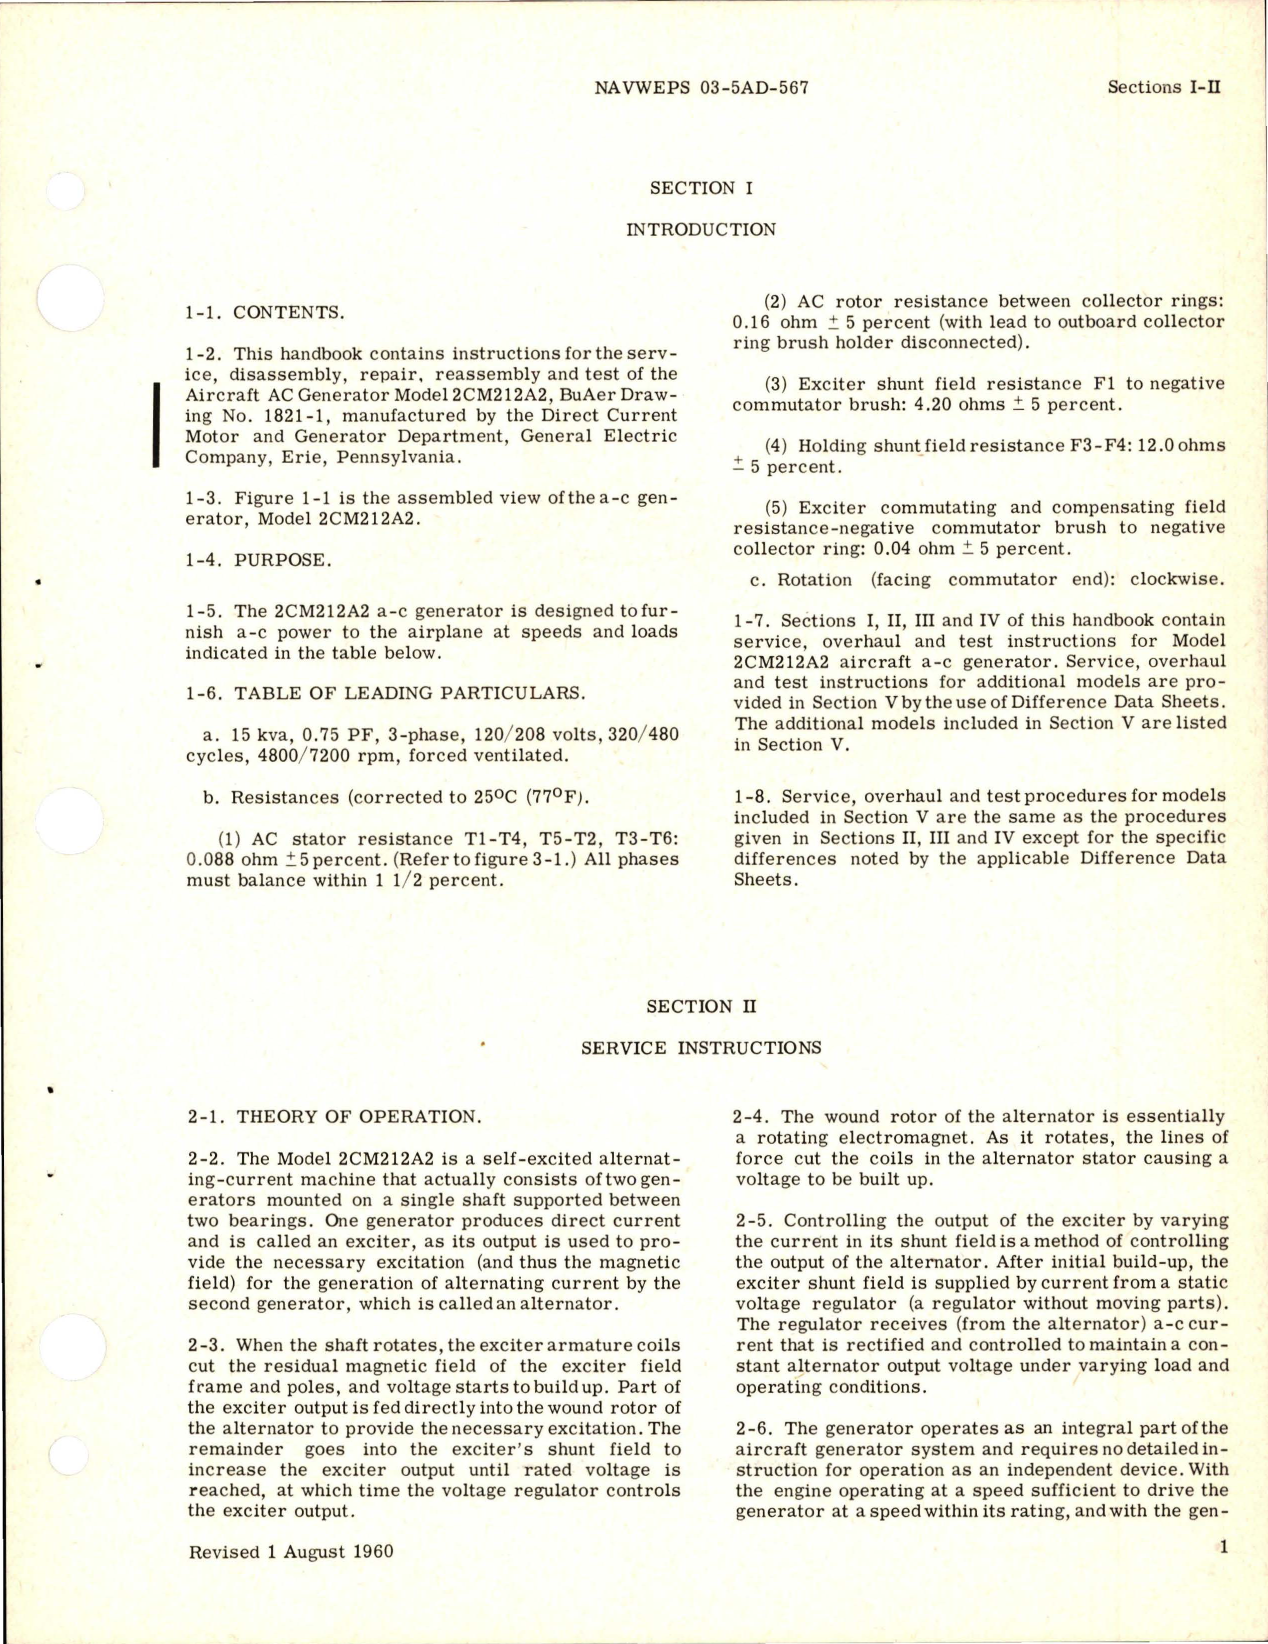 Sample page 5 from AirCorps Library document: Overhaul and Service Instructions for AC Generators 